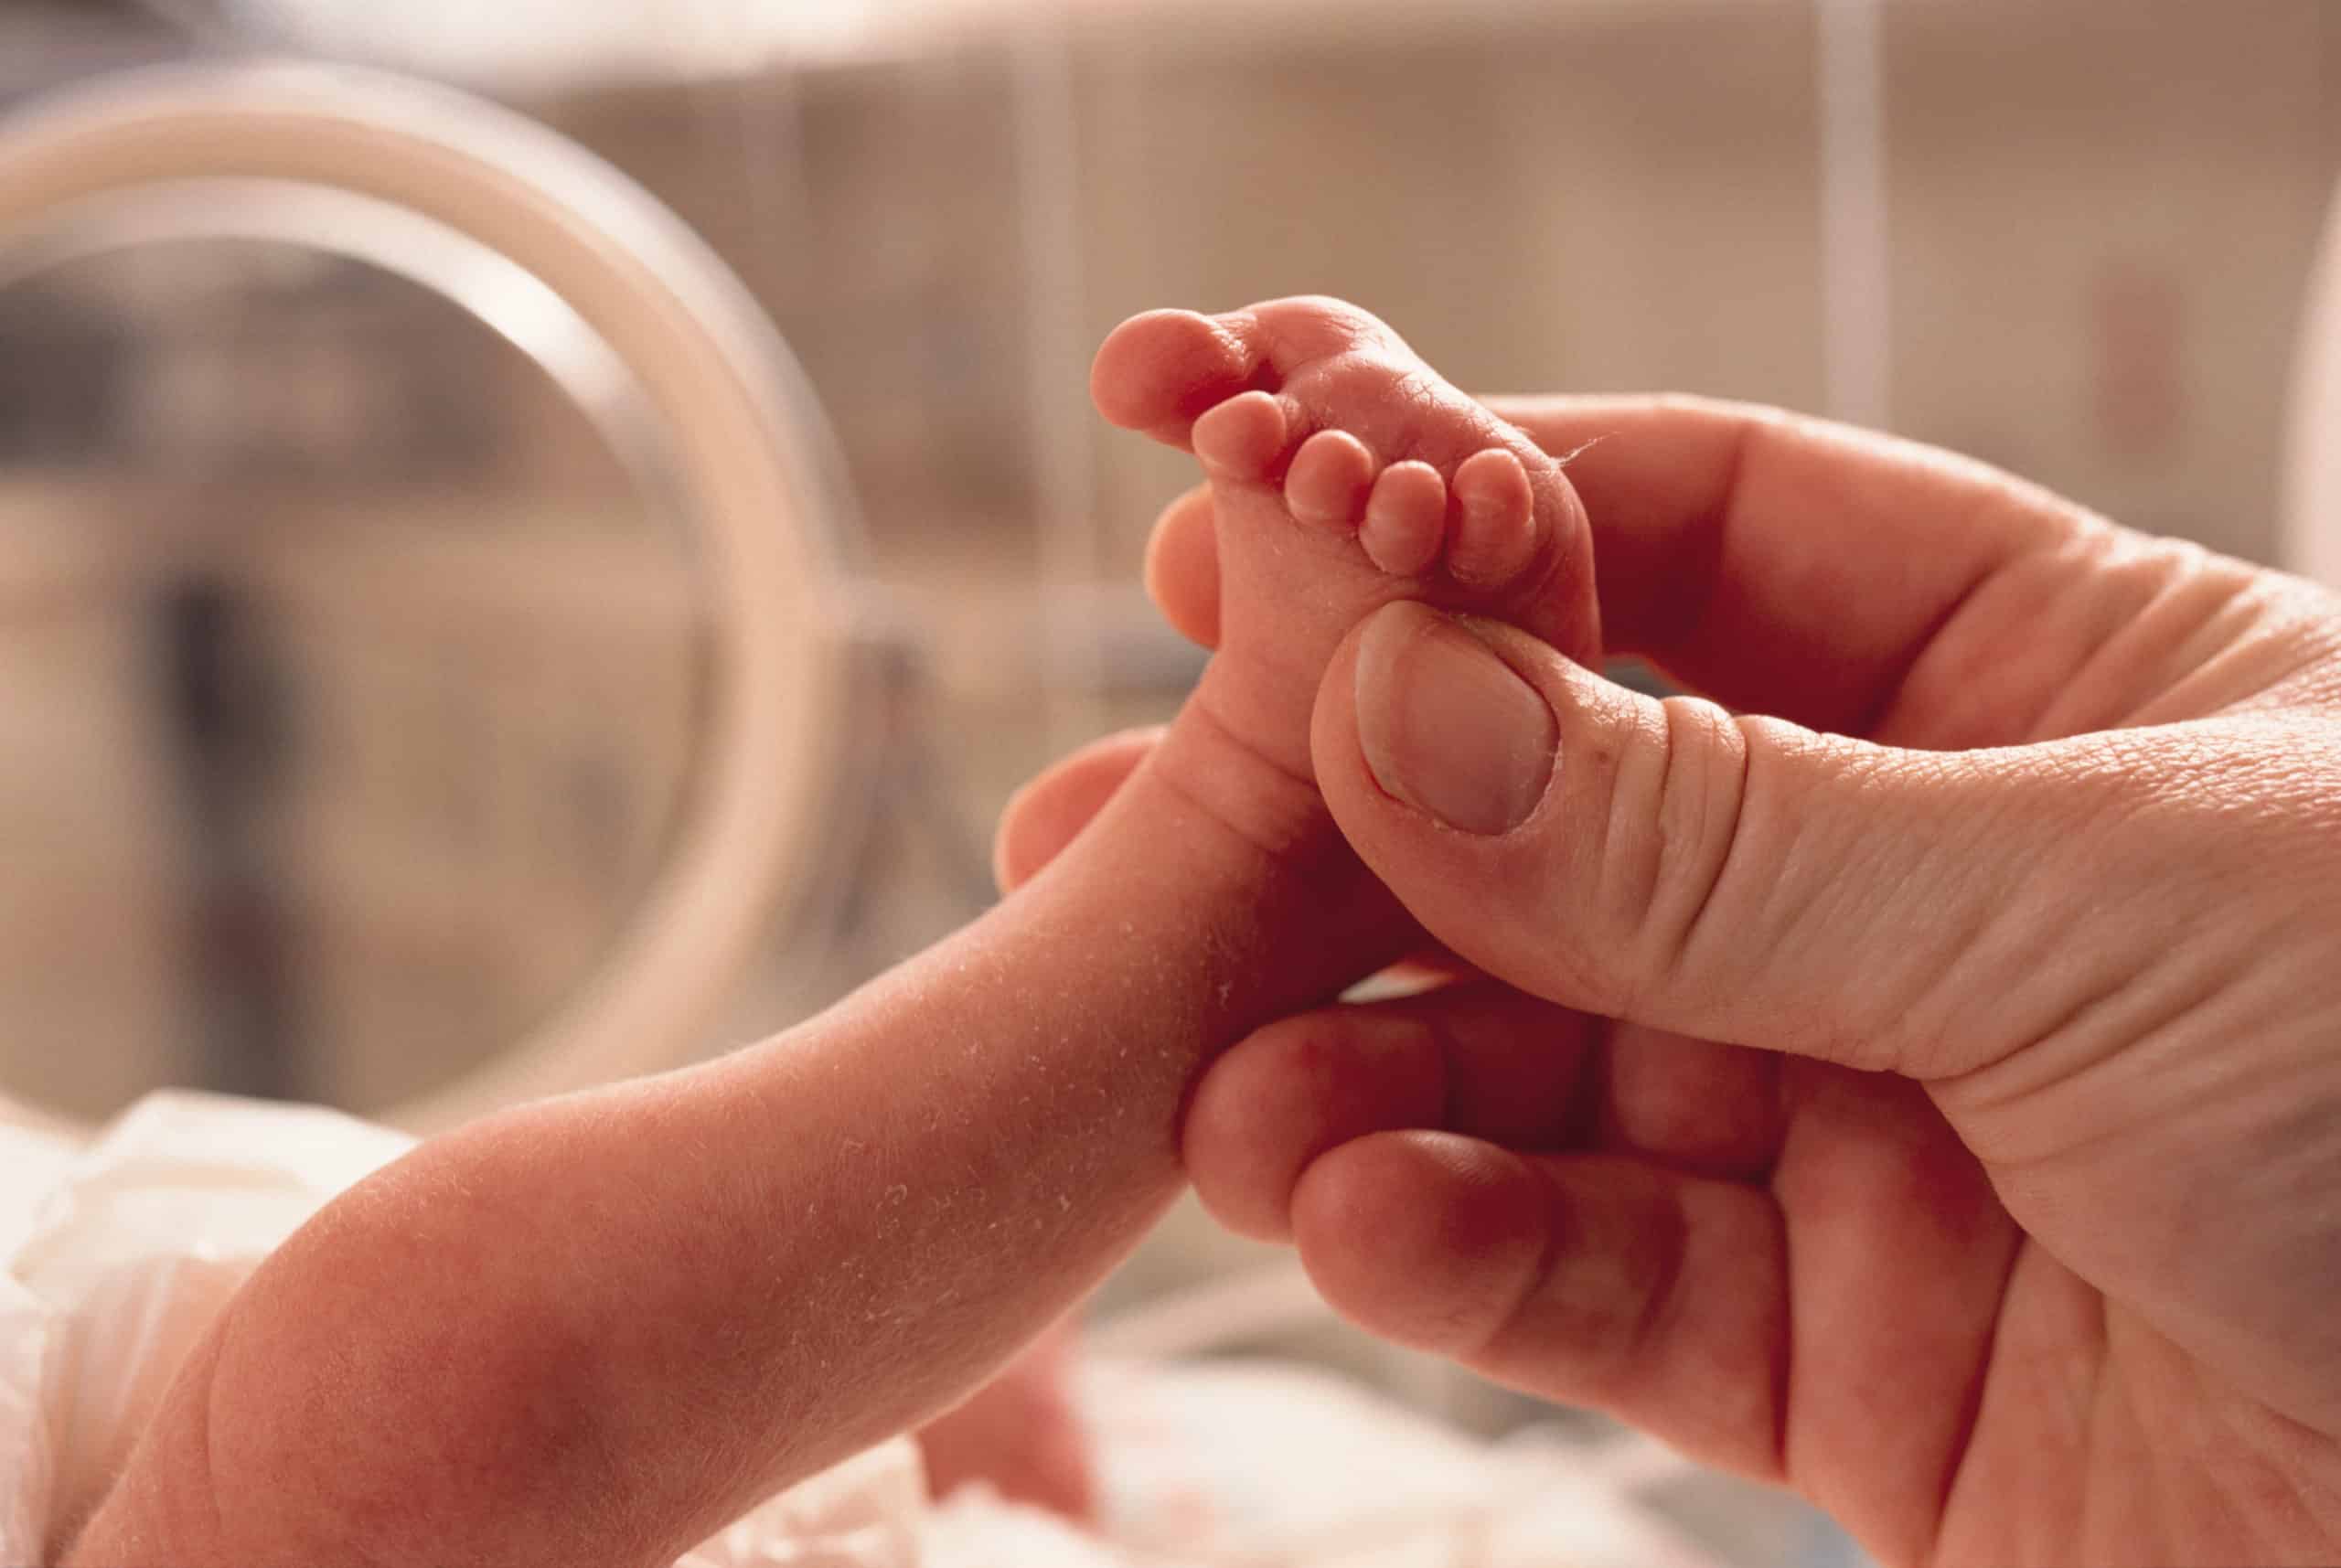 Those Premature Babies: Who Will Stand Up For Them?